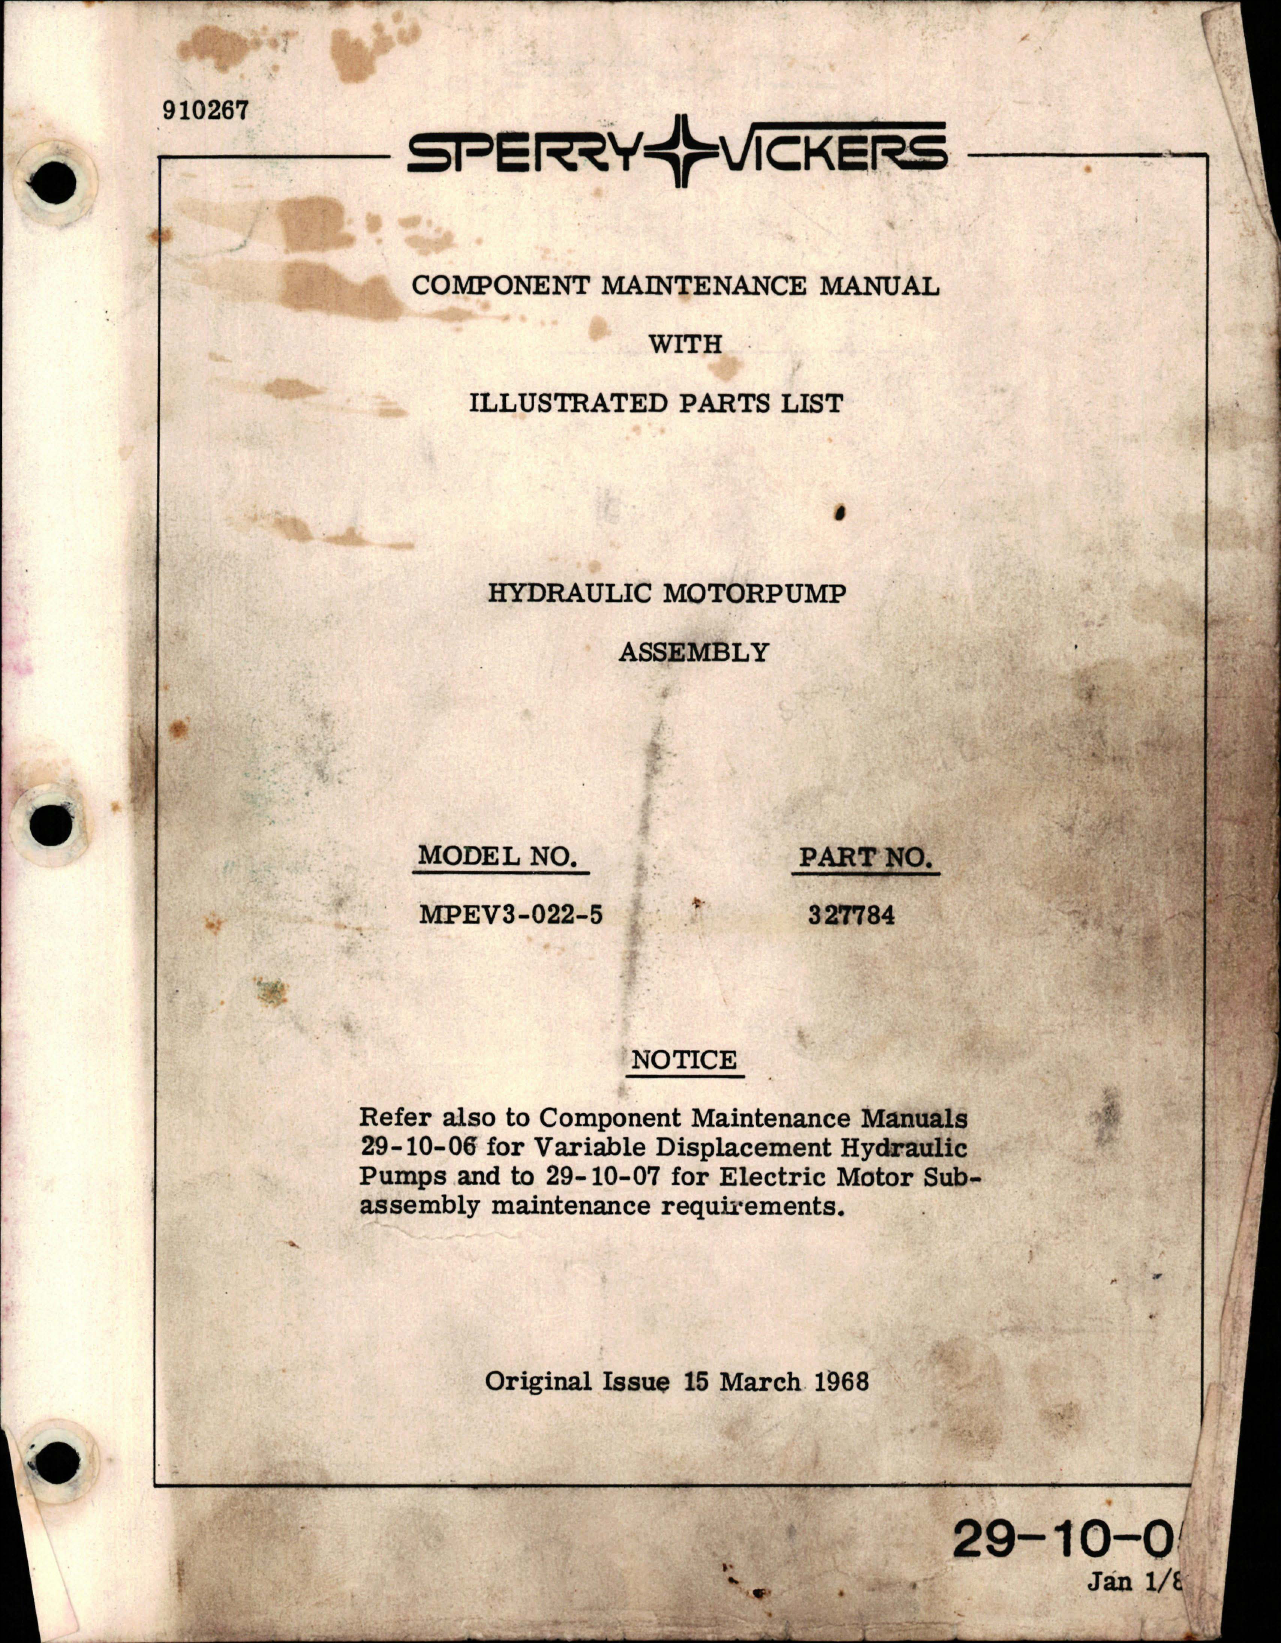 Sample page 1 from AirCorps Library document: Maintenance Manual with Illustrated Parts List for Hydraulic Motorpump Assembly - Model MPEV3-022-5 - Part 327784